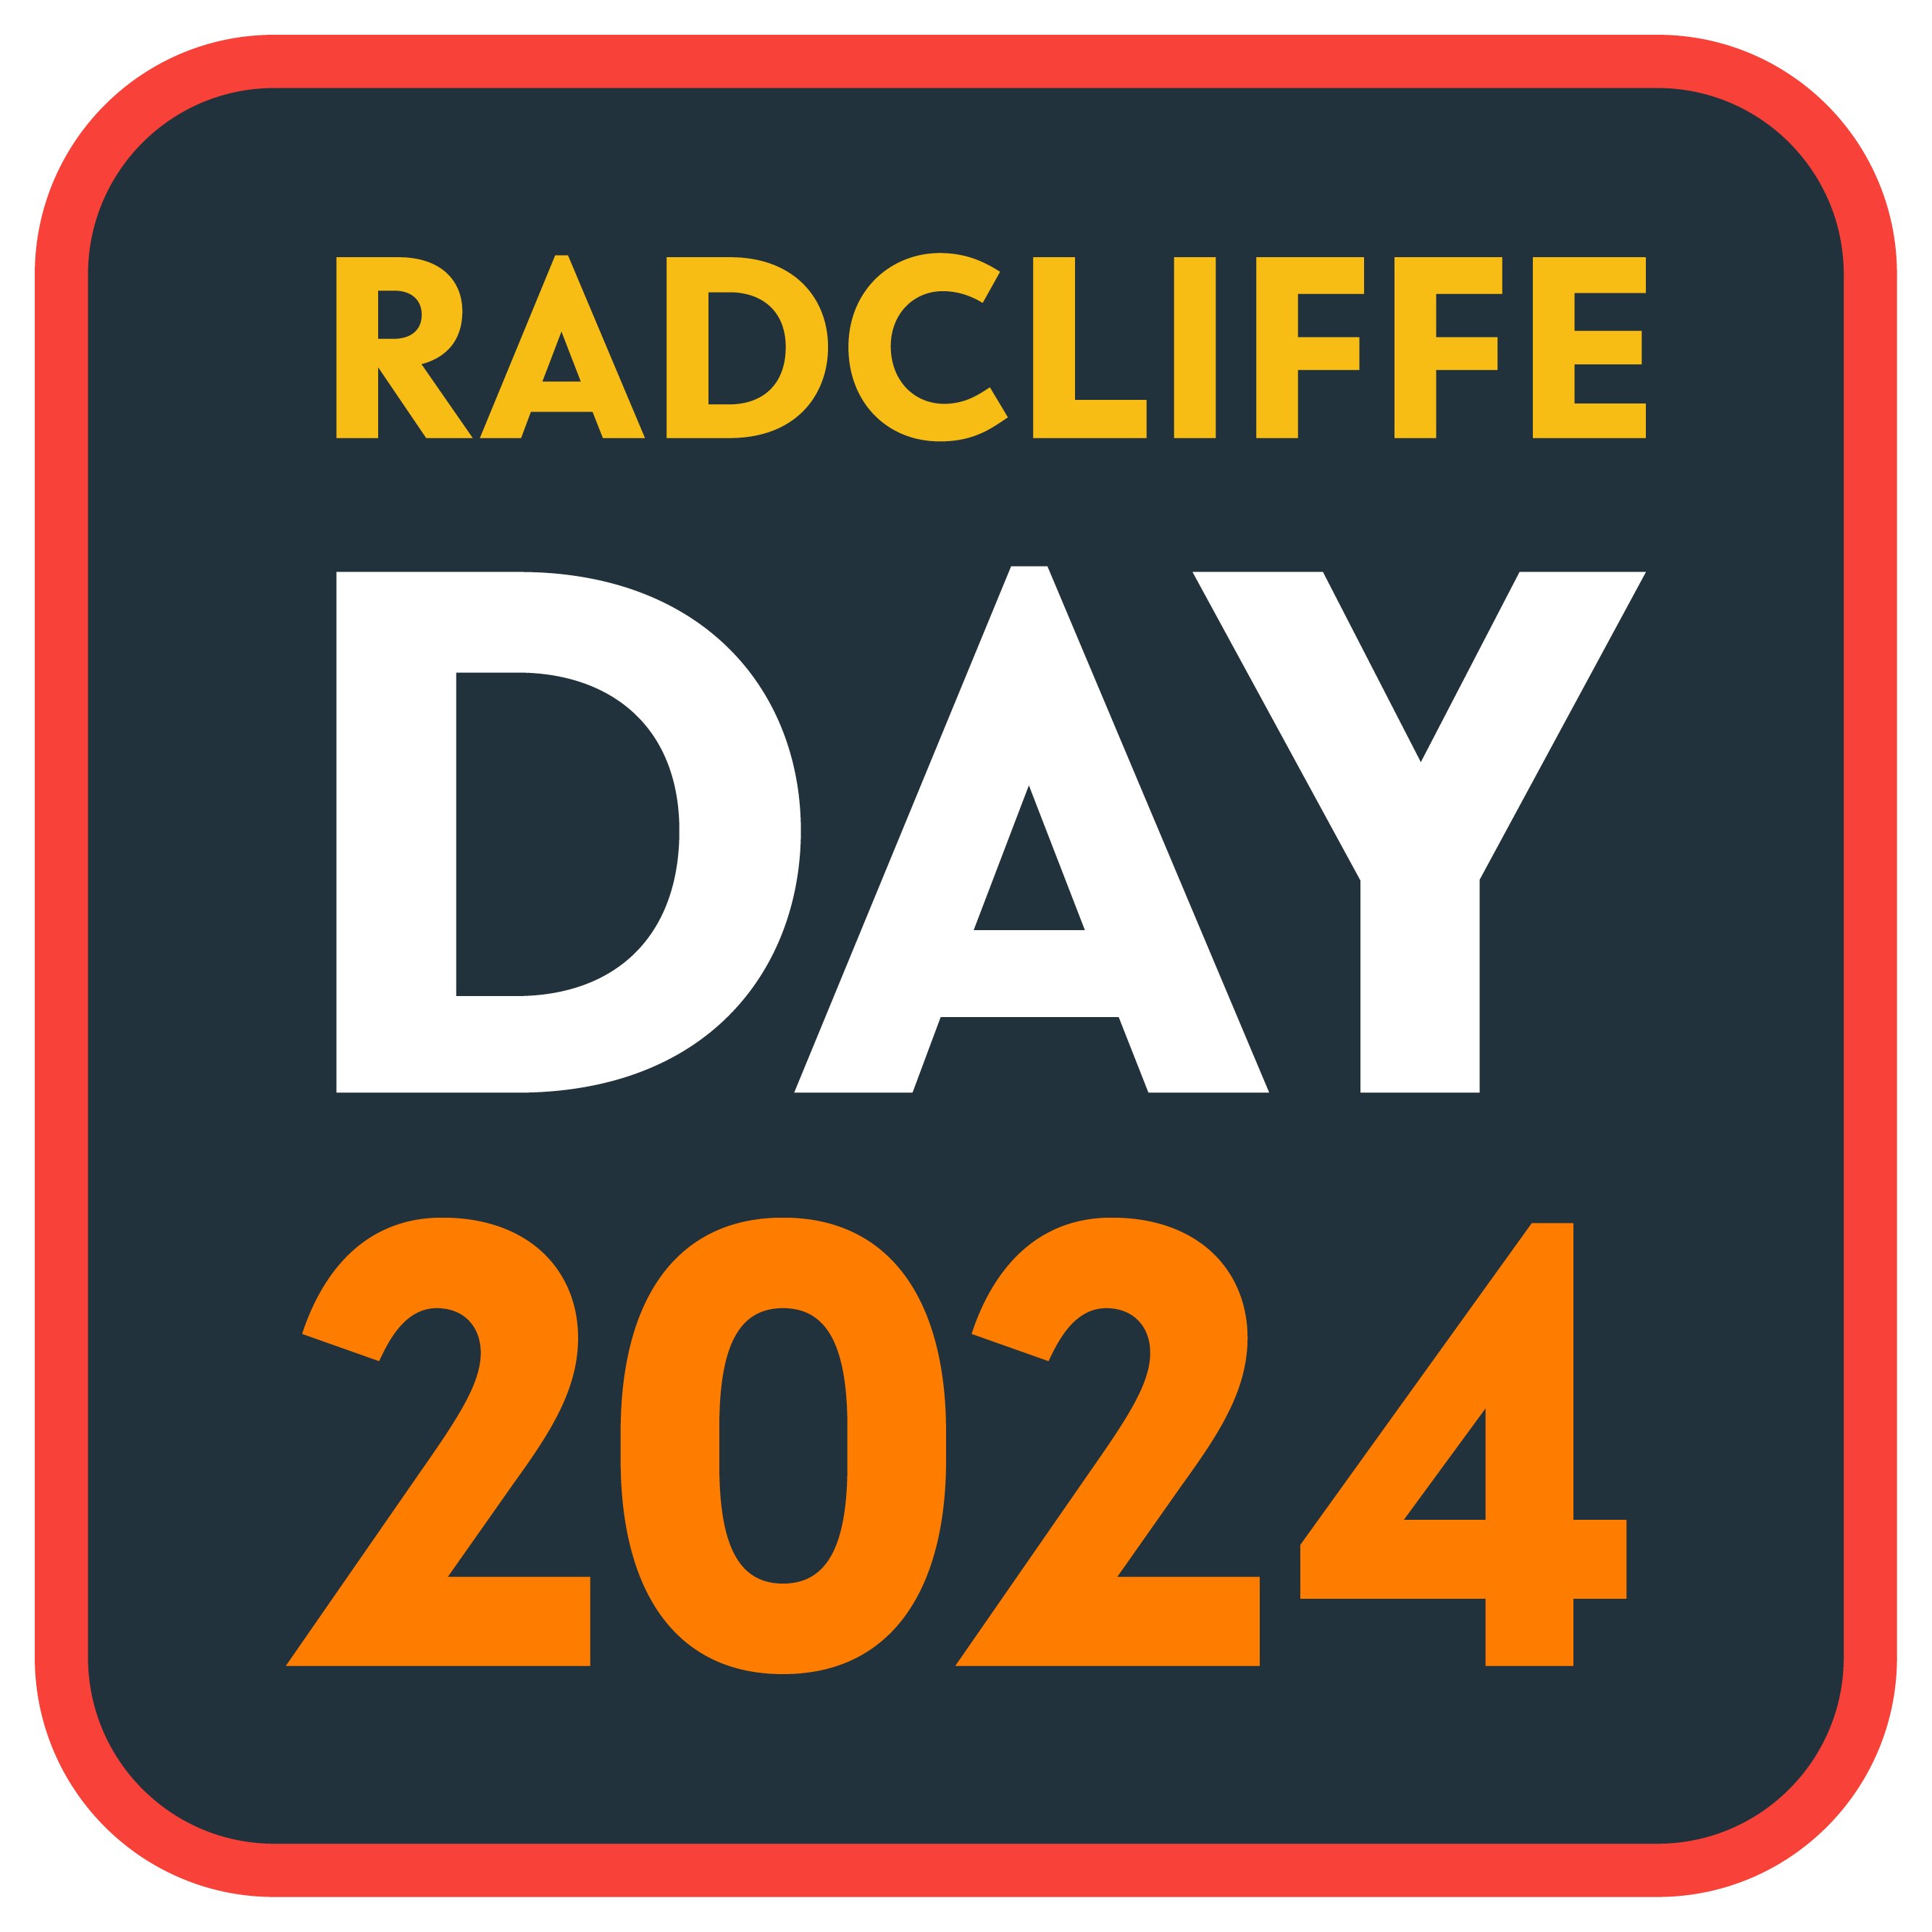 Radcliffe Day 2024